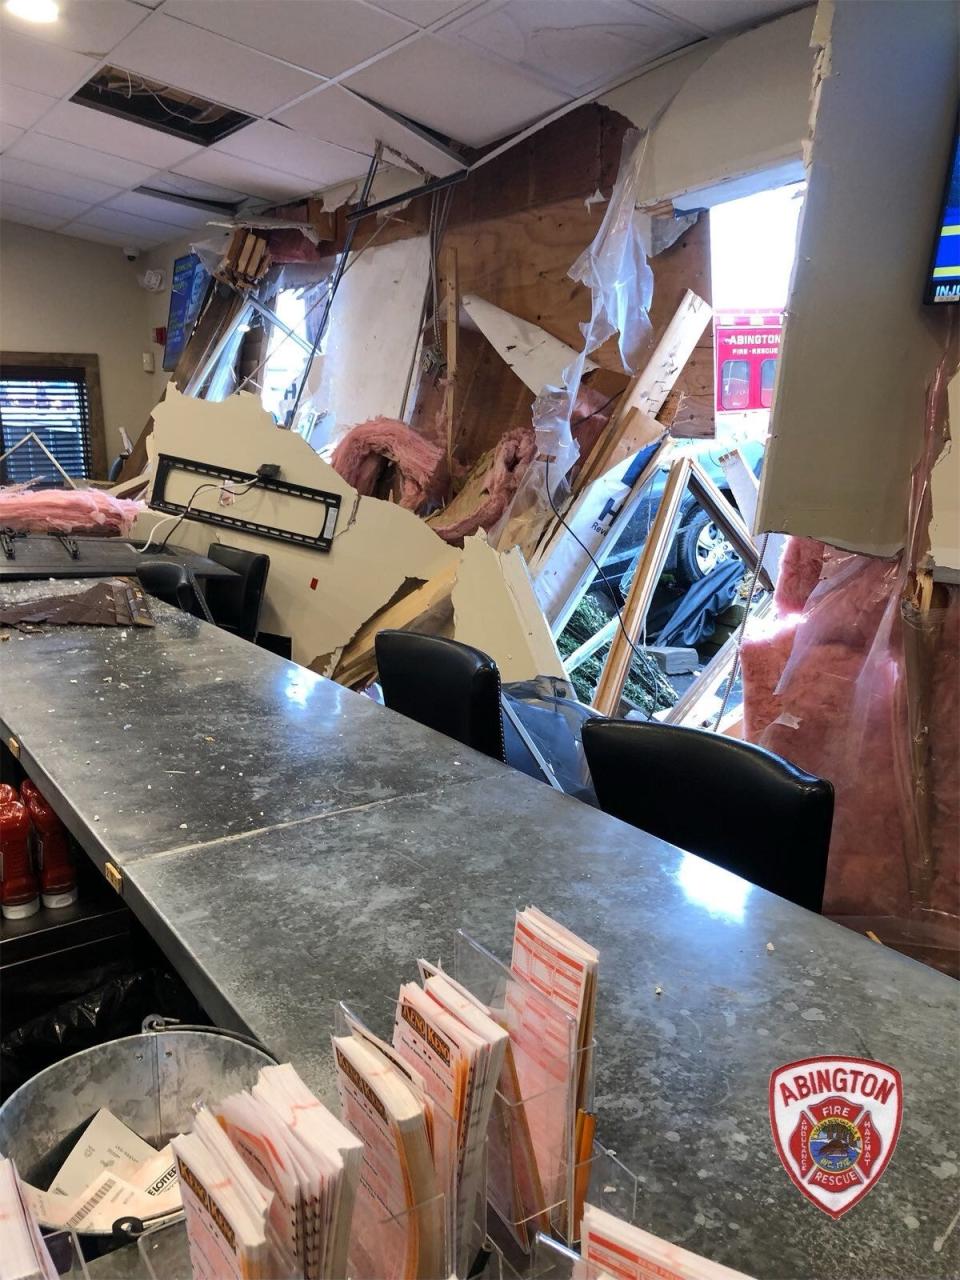 A car crashed into the side of D'Ann's restaurant in Abington on Monday morning, Nov. 22, 2021, before it opened for the day.